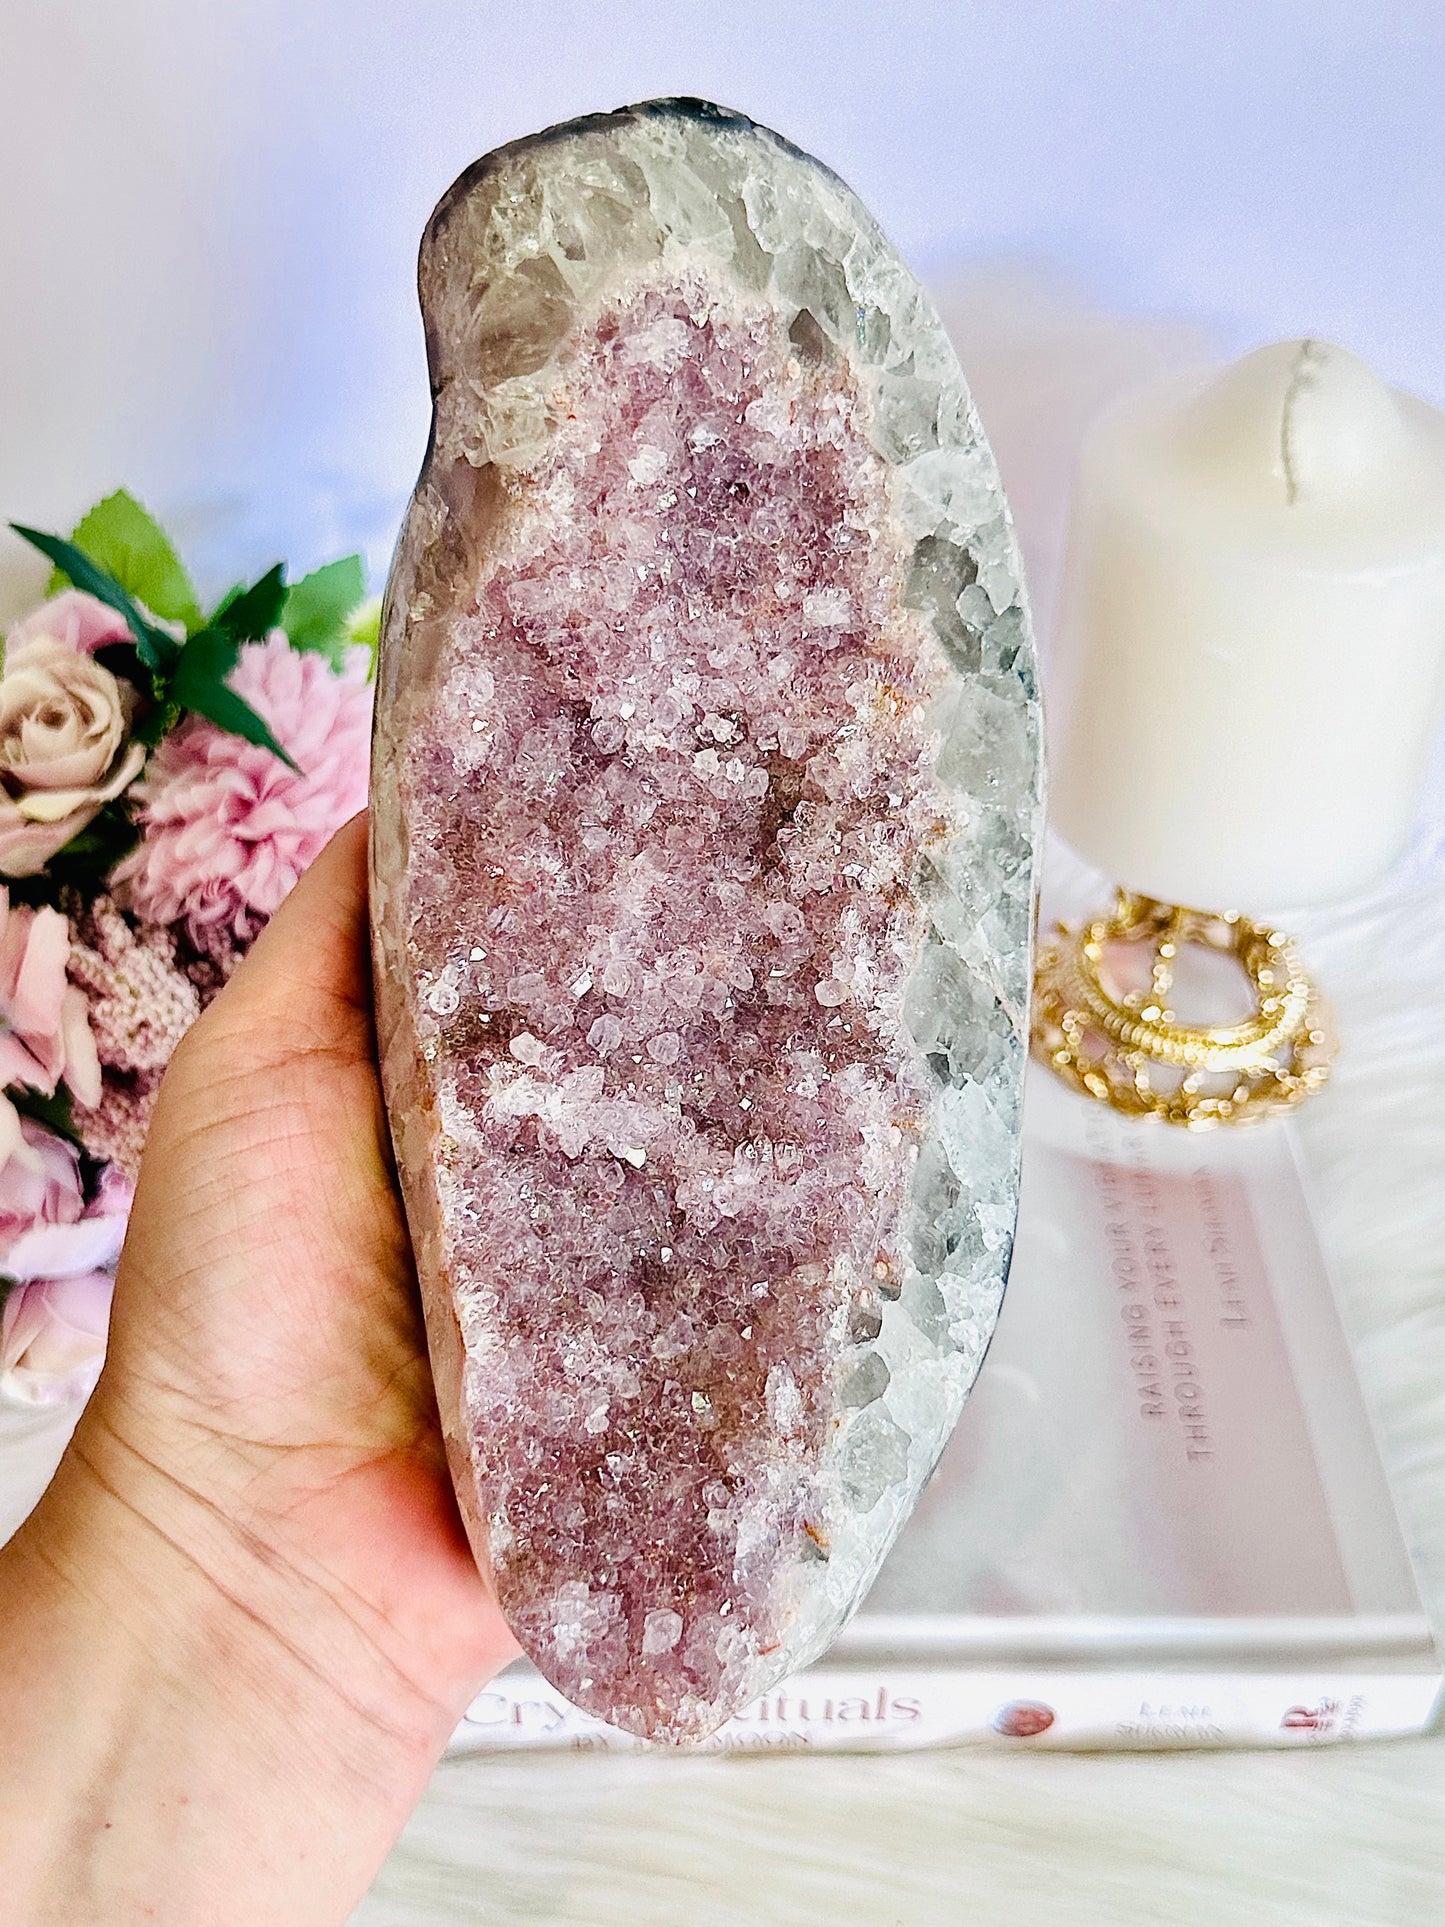 Wow!!! Elegant & Classy Large Shimmering Natural Druzy Amethyst Freeform 21cm 1.2KG On Stand From Brazil